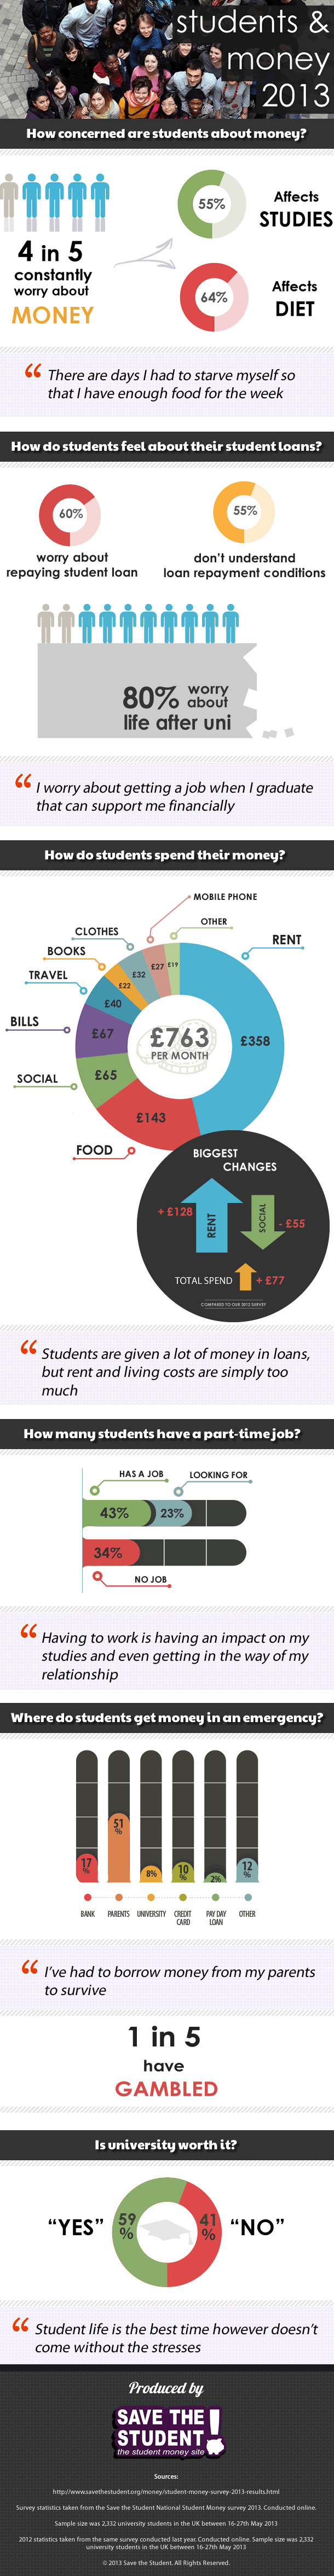 Students and money stats infographic